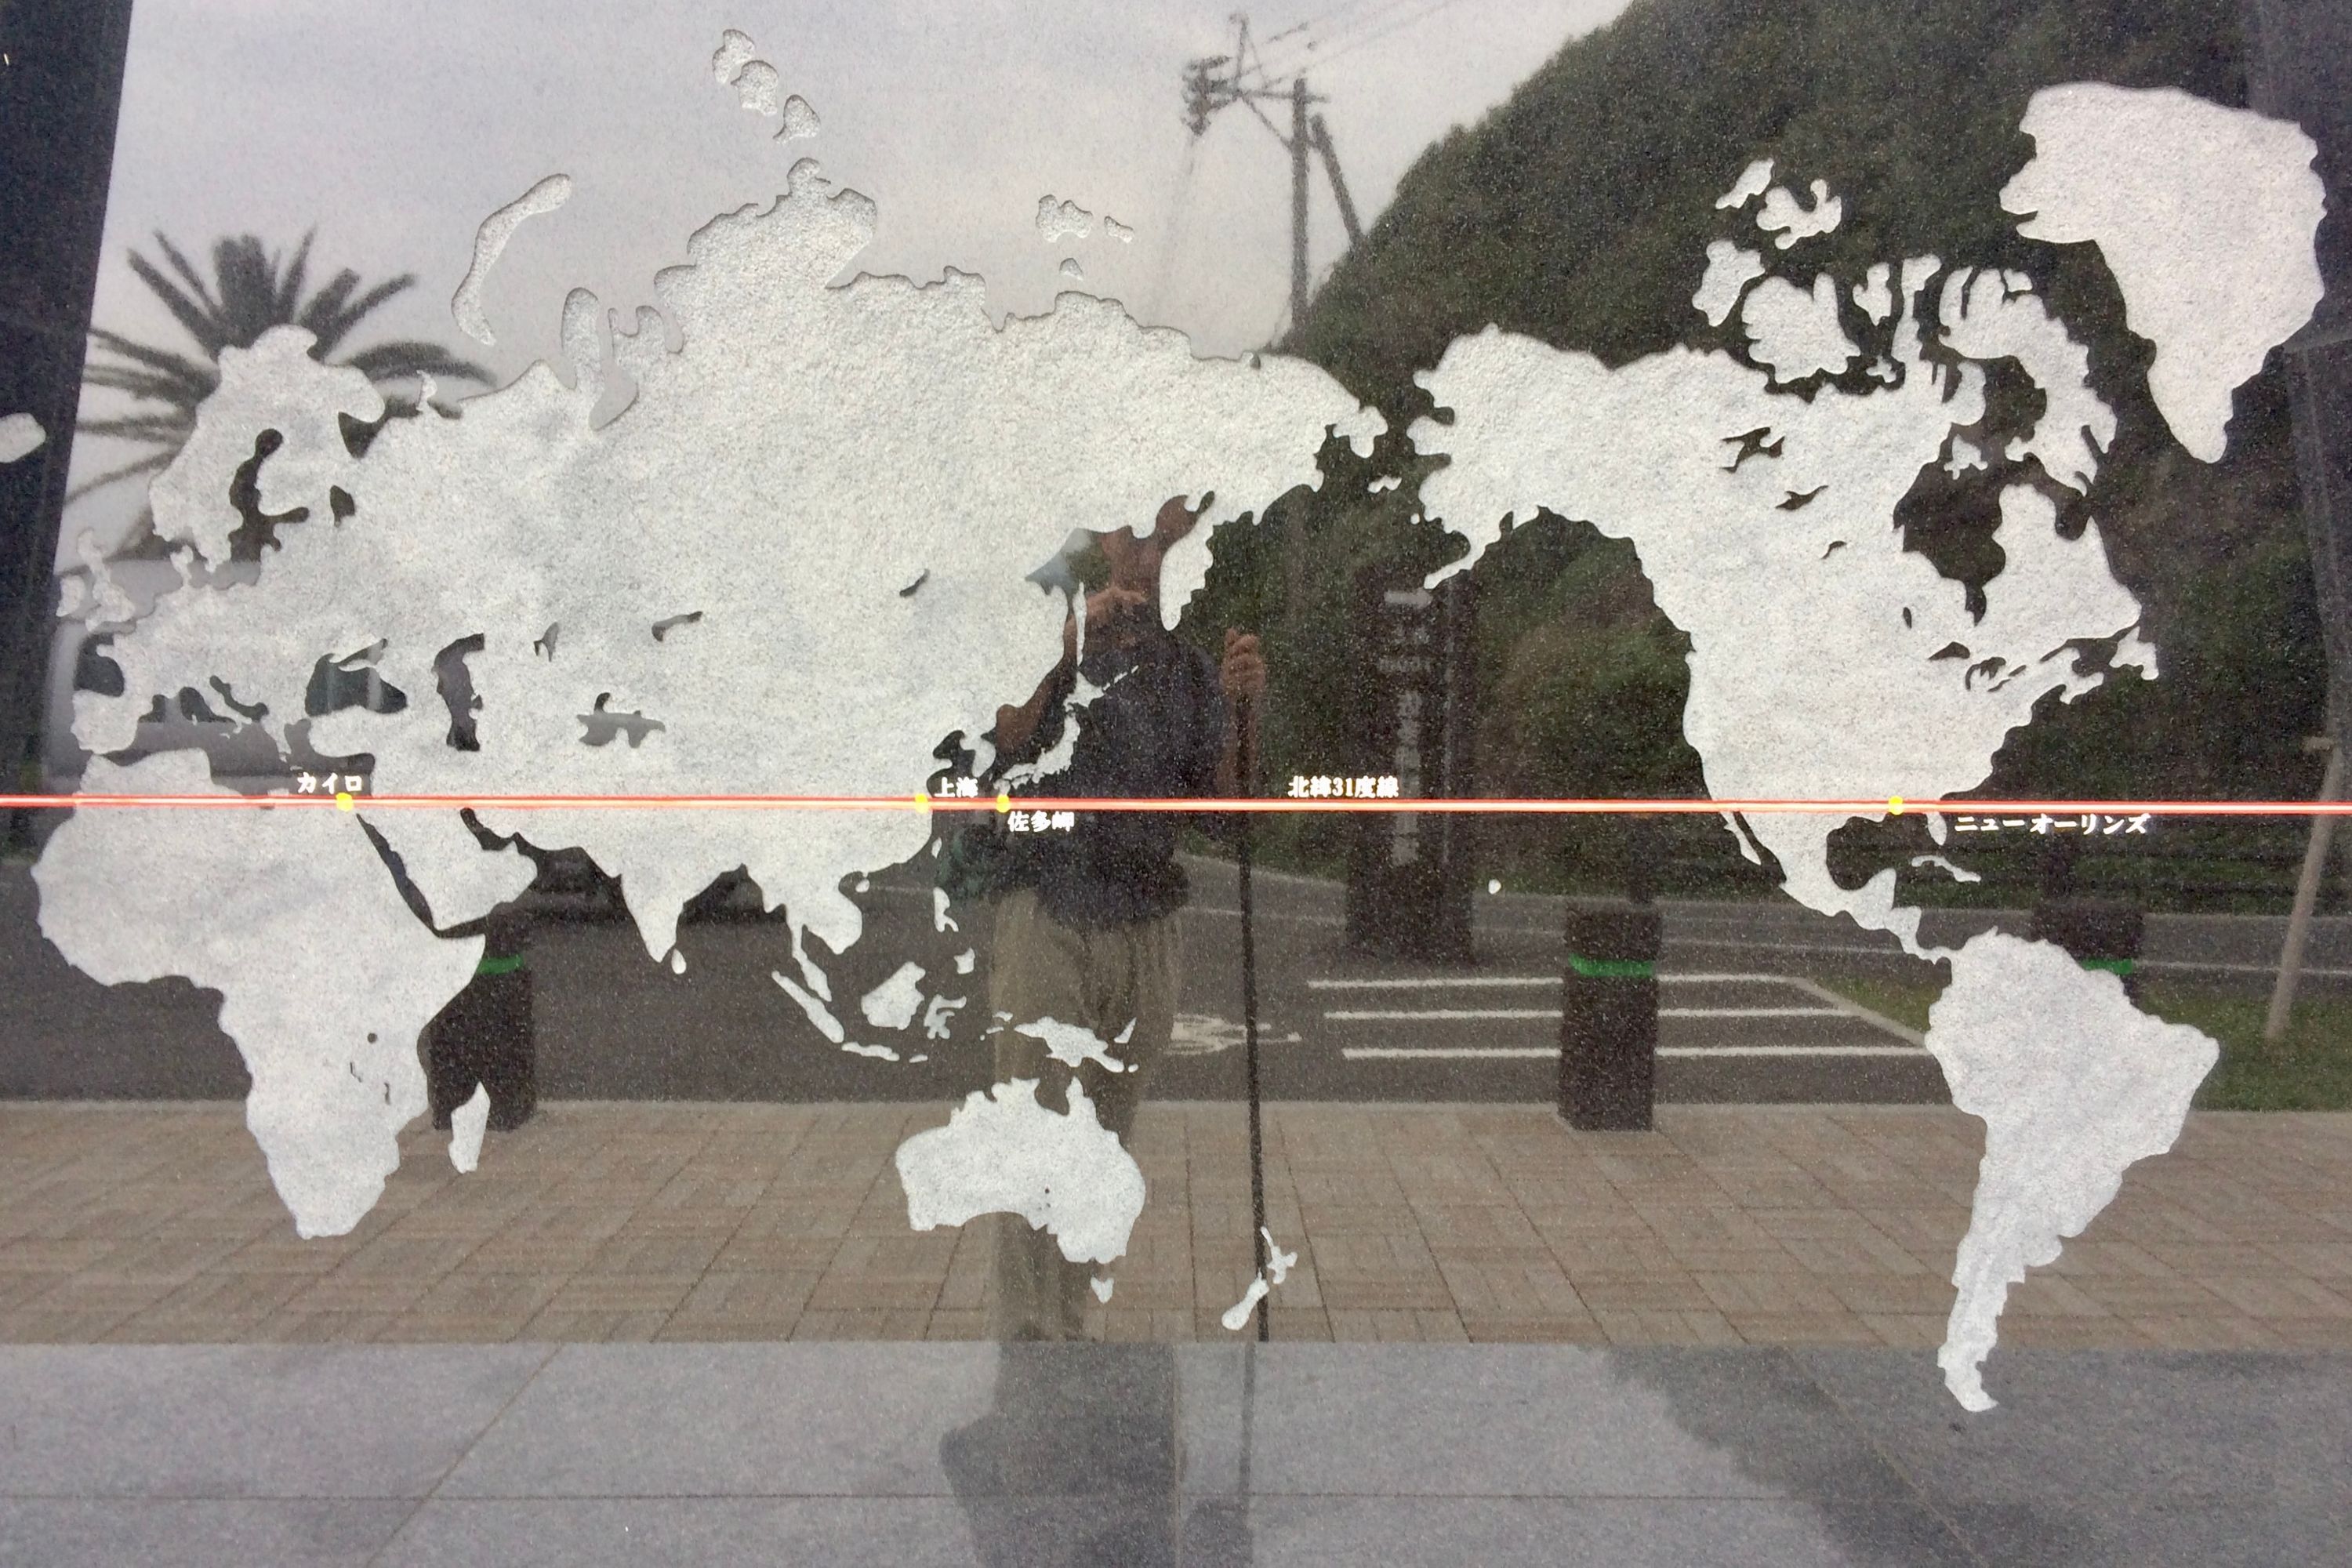 The author reflected in a memorial of the 31st parallel north, which shows a world map with the line running through it.